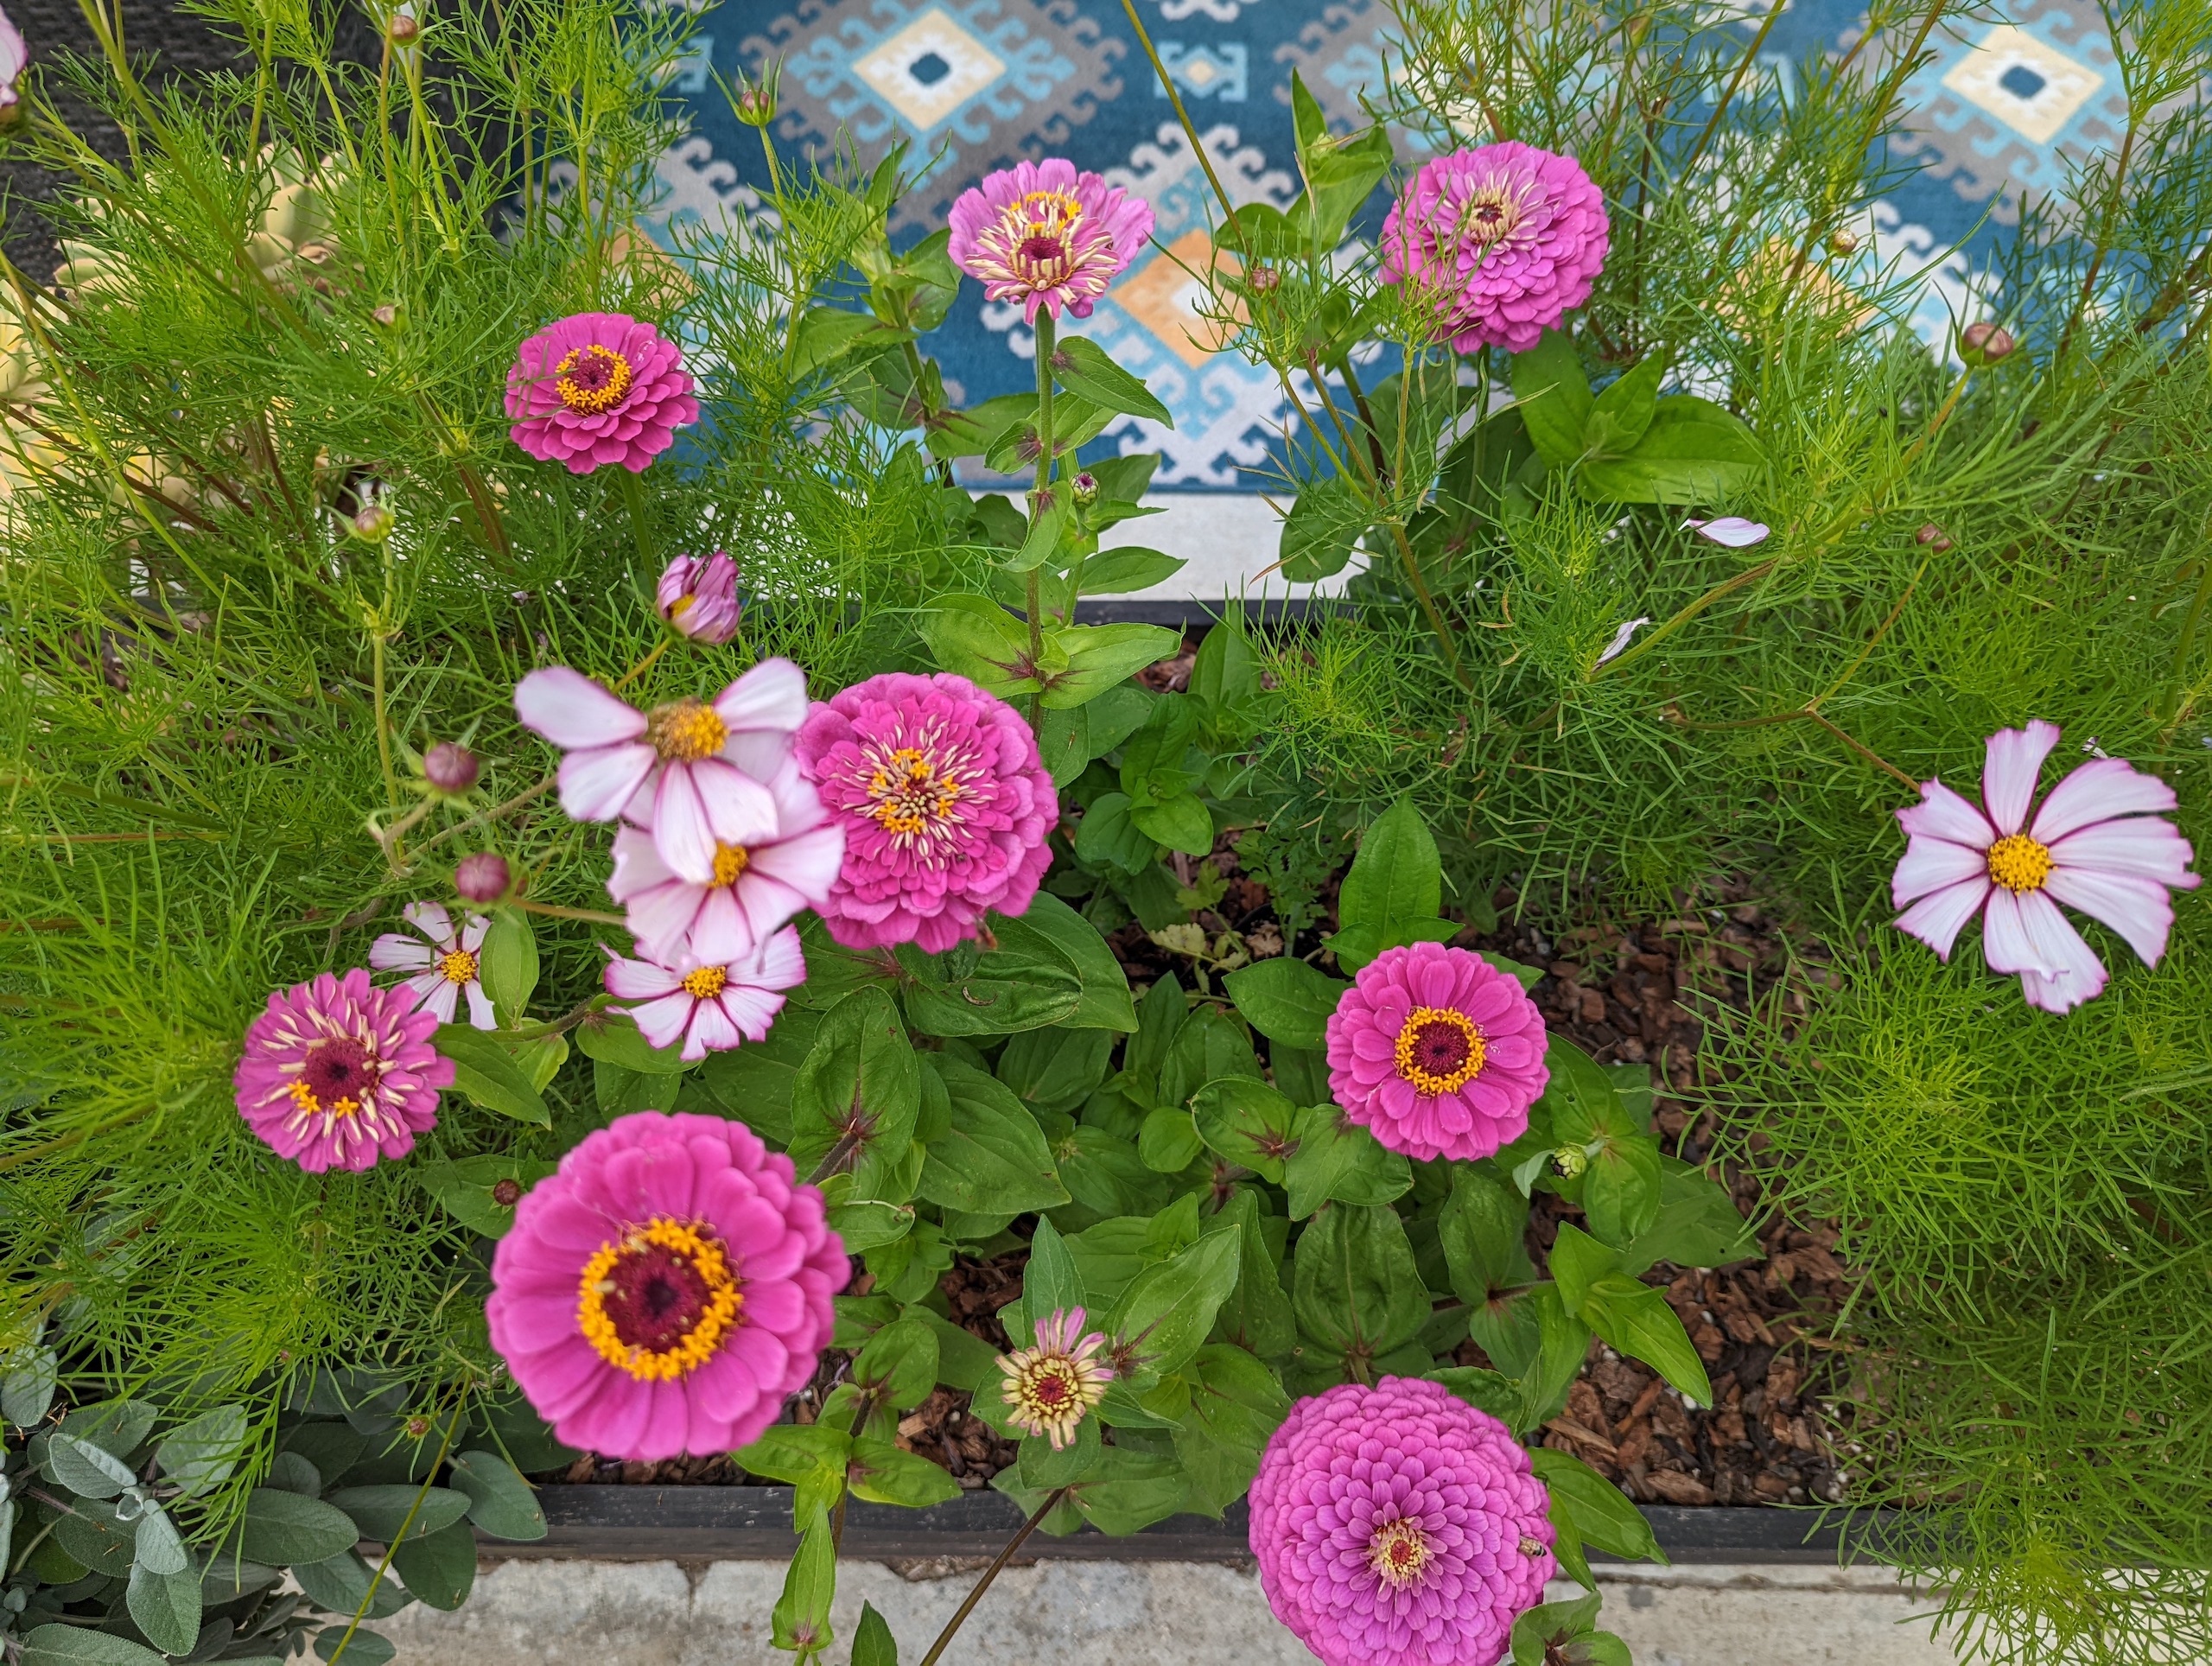 Candy stripe cosmos and purple zinnias in full bloom.